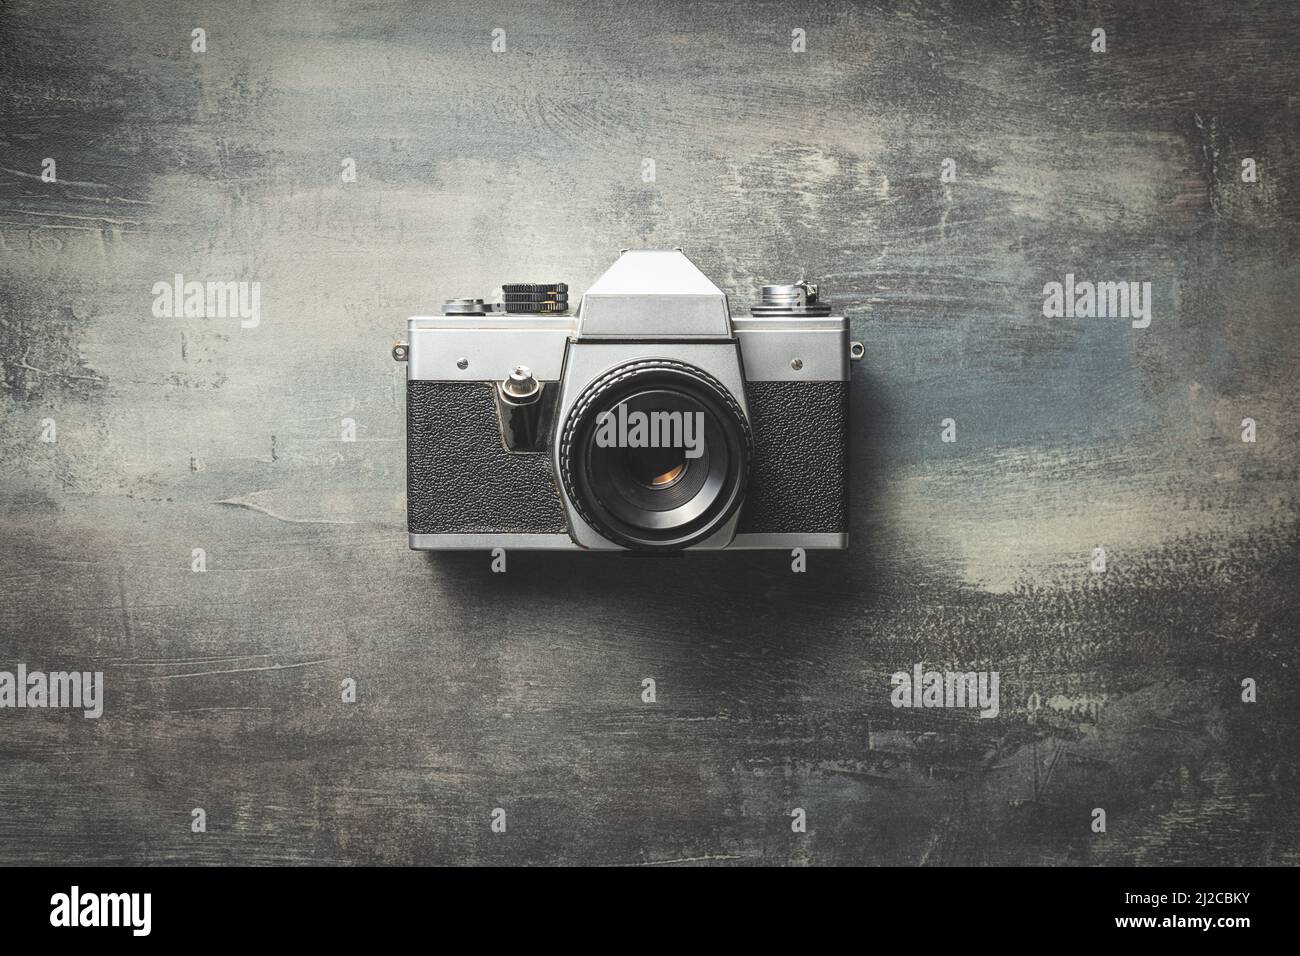 Retro analogue camera. Vintage old fashioned camera with lens on grunge background. Top view. Stock Photo